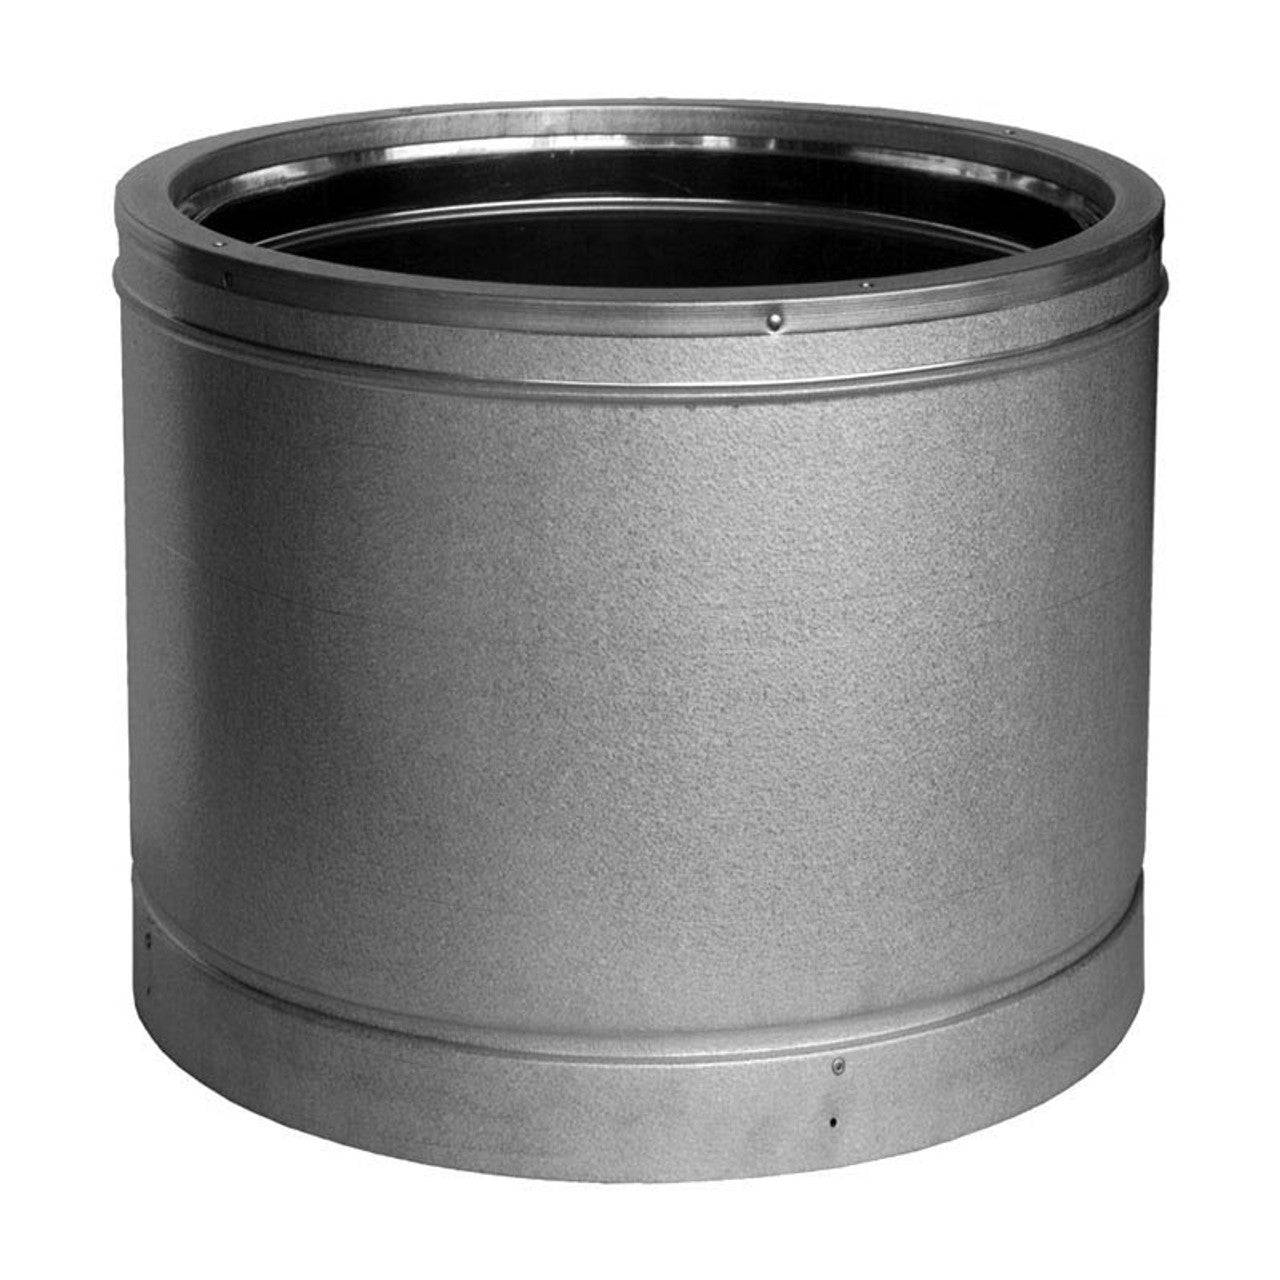 14" x 18" DuraVent DuraTech Double-Wall Stainless Steel Chimney Pipe - 14DT-18SS - Chimney Cricket